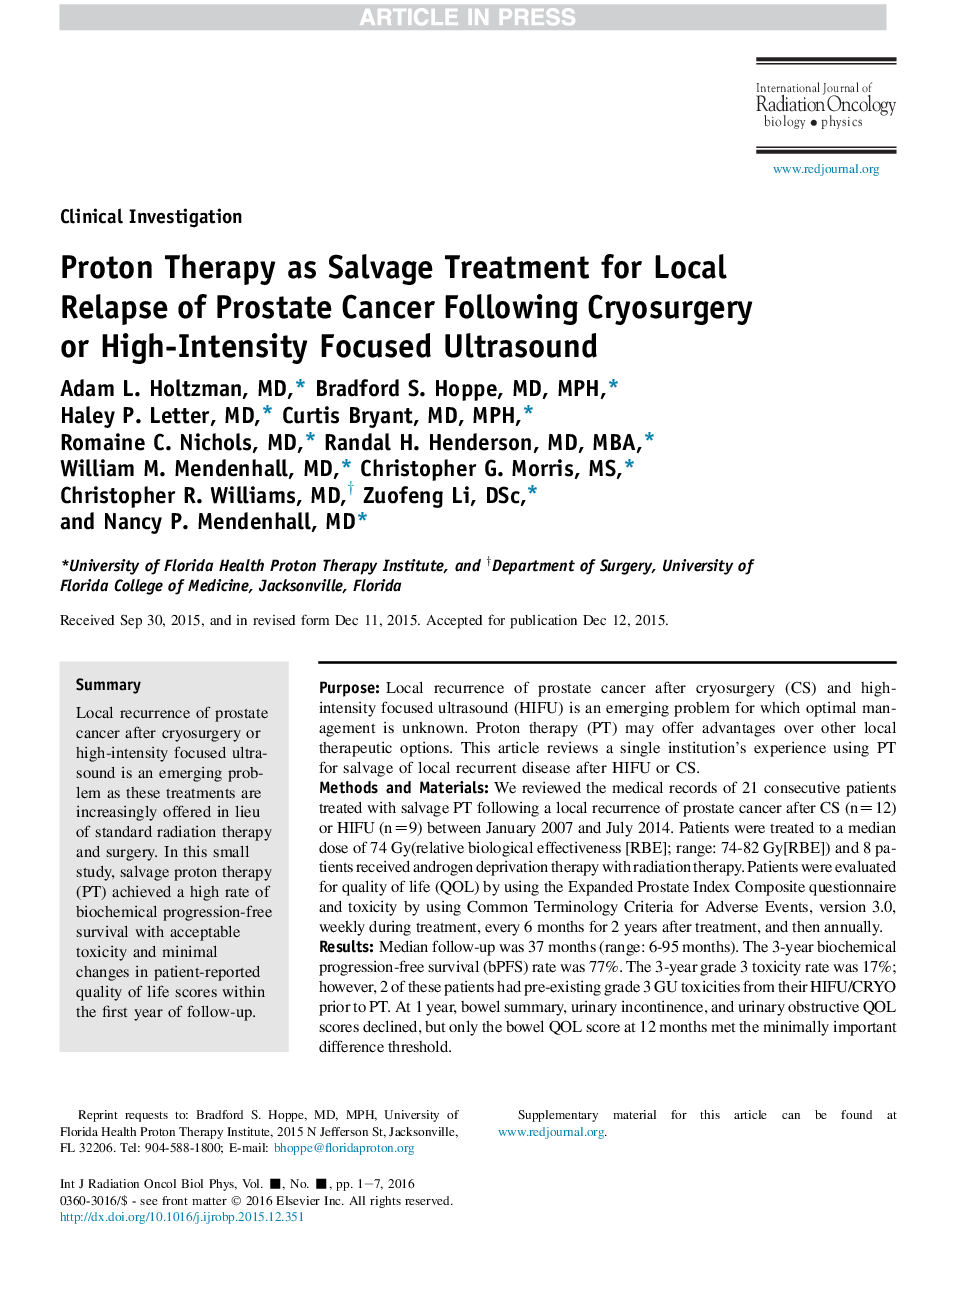 Proton Therapy as Salvage Treatment for Local Relapse of Prostate Cancer Following Cryosurgery or High-Intensity Focused Ultrasound